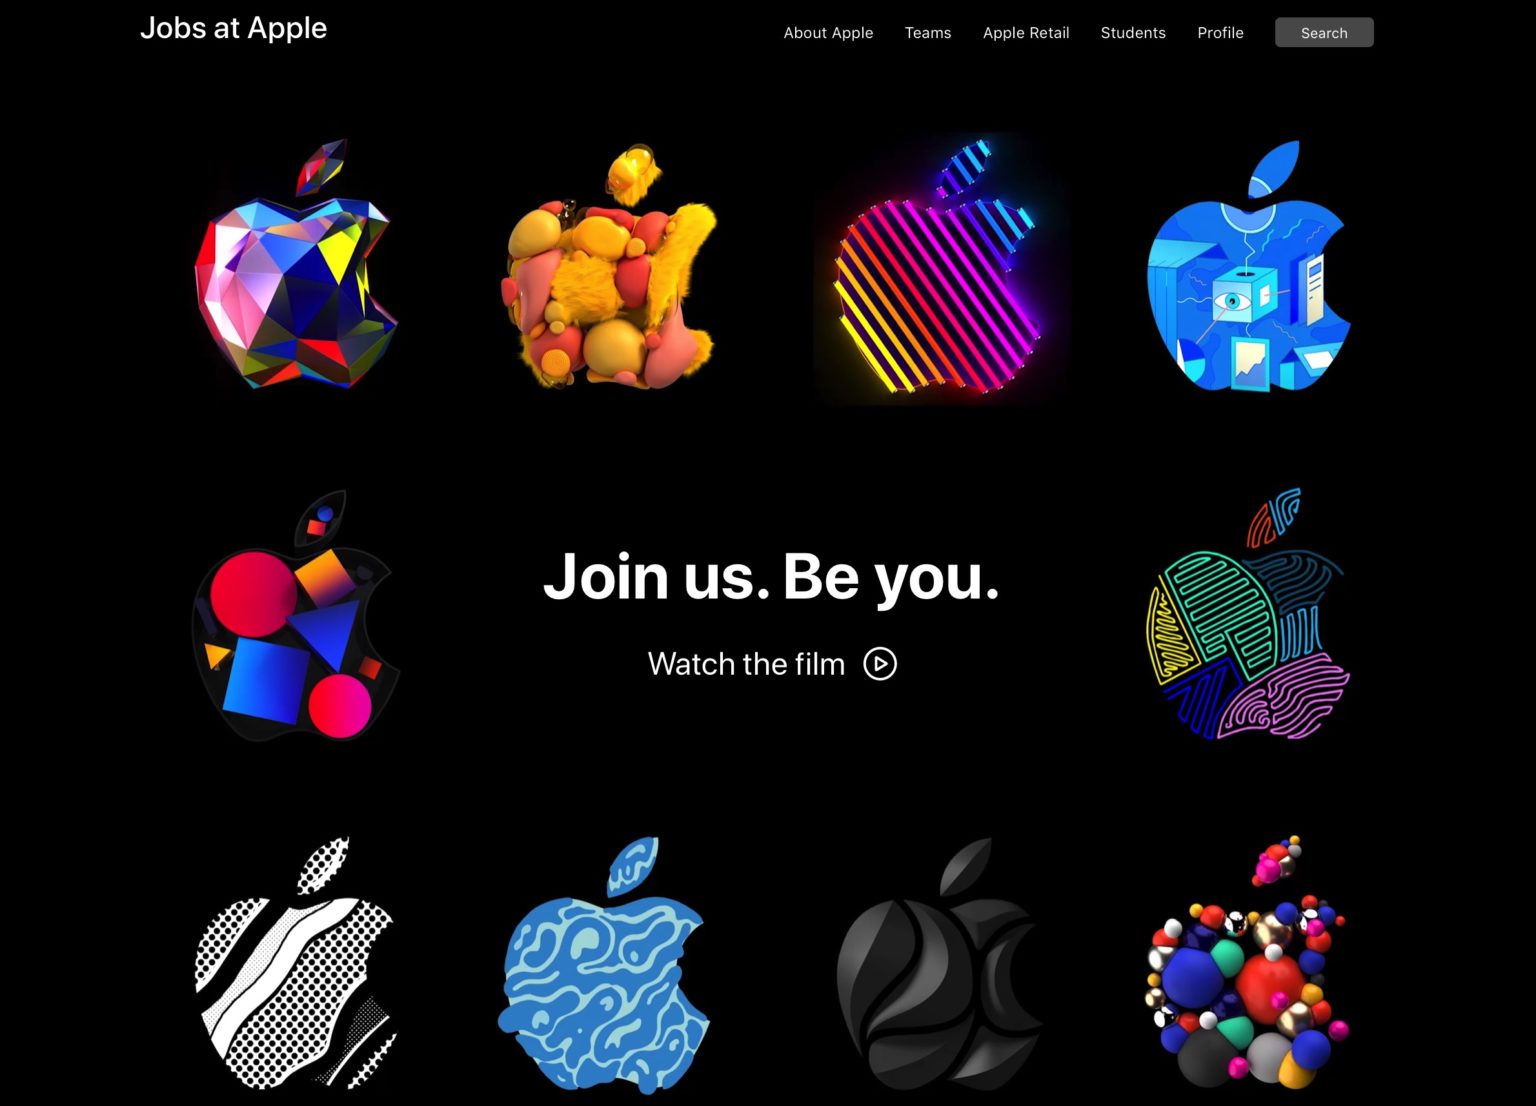 Apple gives its hiring page a colorful overhaul -- and a renewed focus on AI